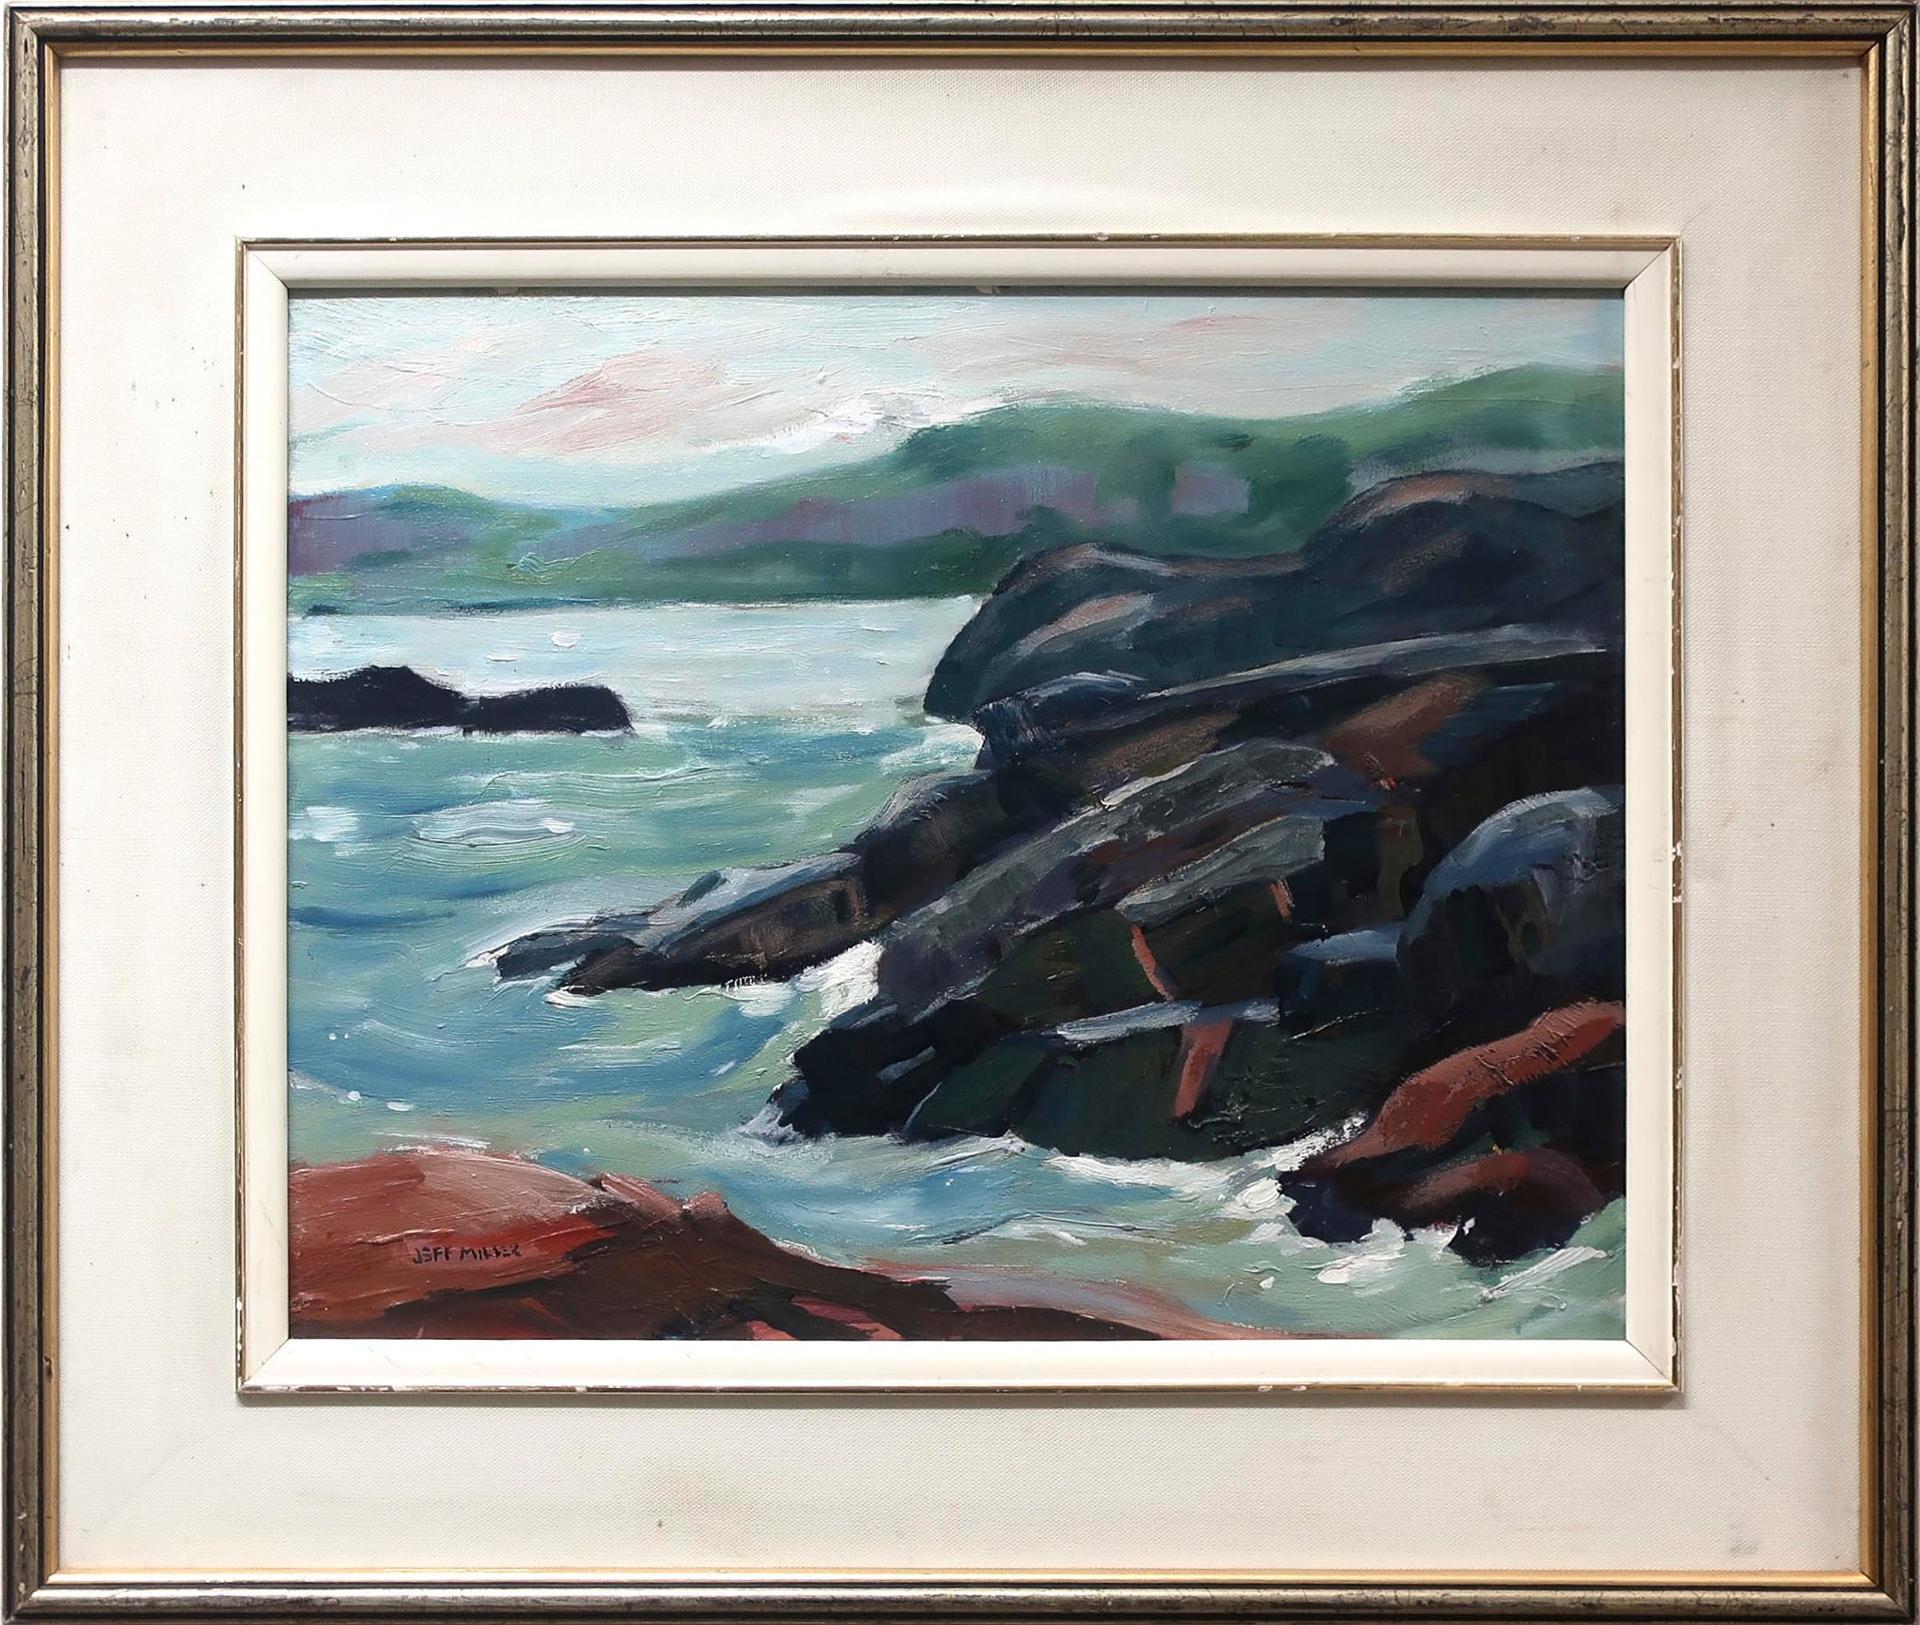 Jeff Miller (1931) - On The Shore, Lake Superior